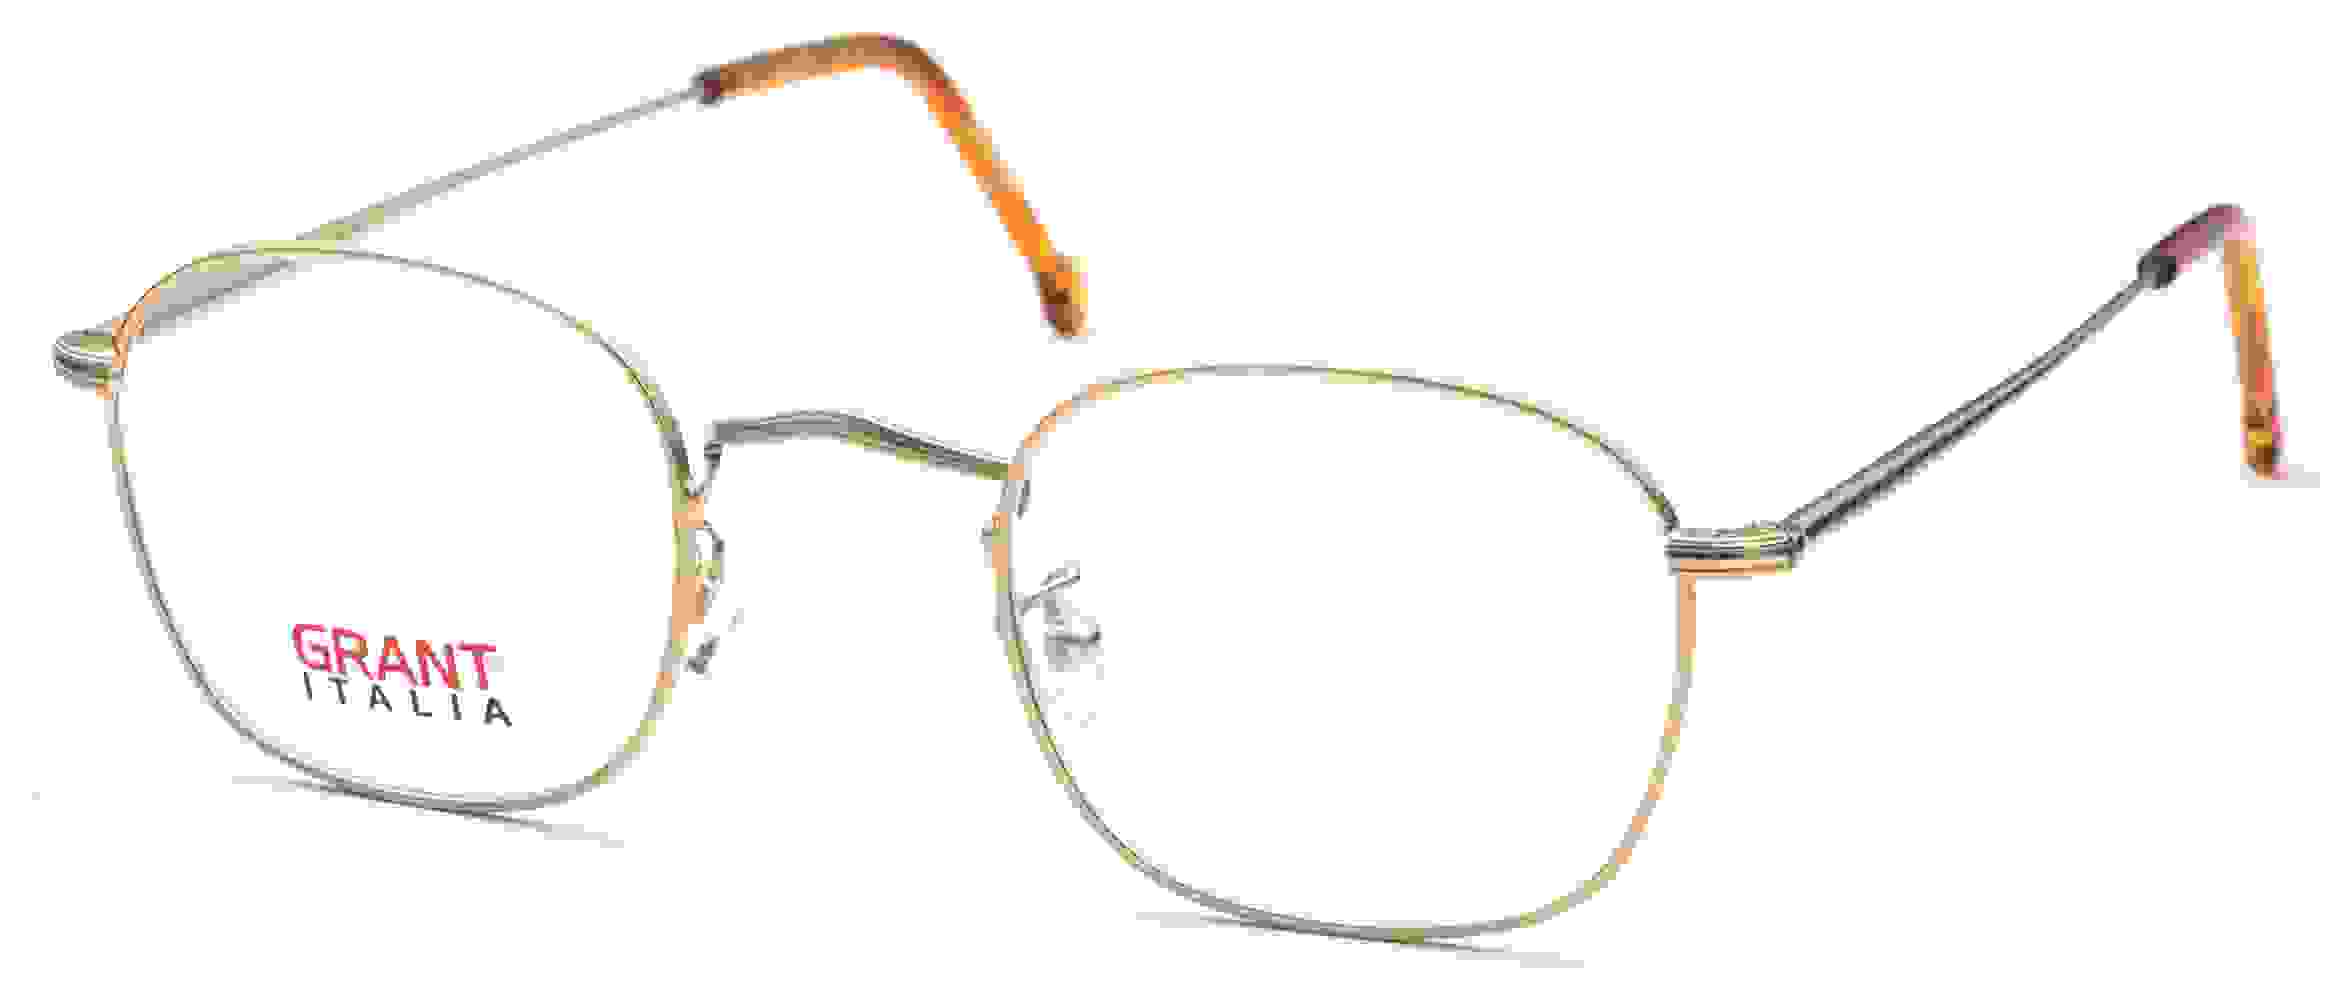 Grant Italia 10 eyeglasses are designed for men and women featuring spring hinges and skull temples. The Grant Italia 10 eyeglasses model is made of metal and manufactured in Italy.